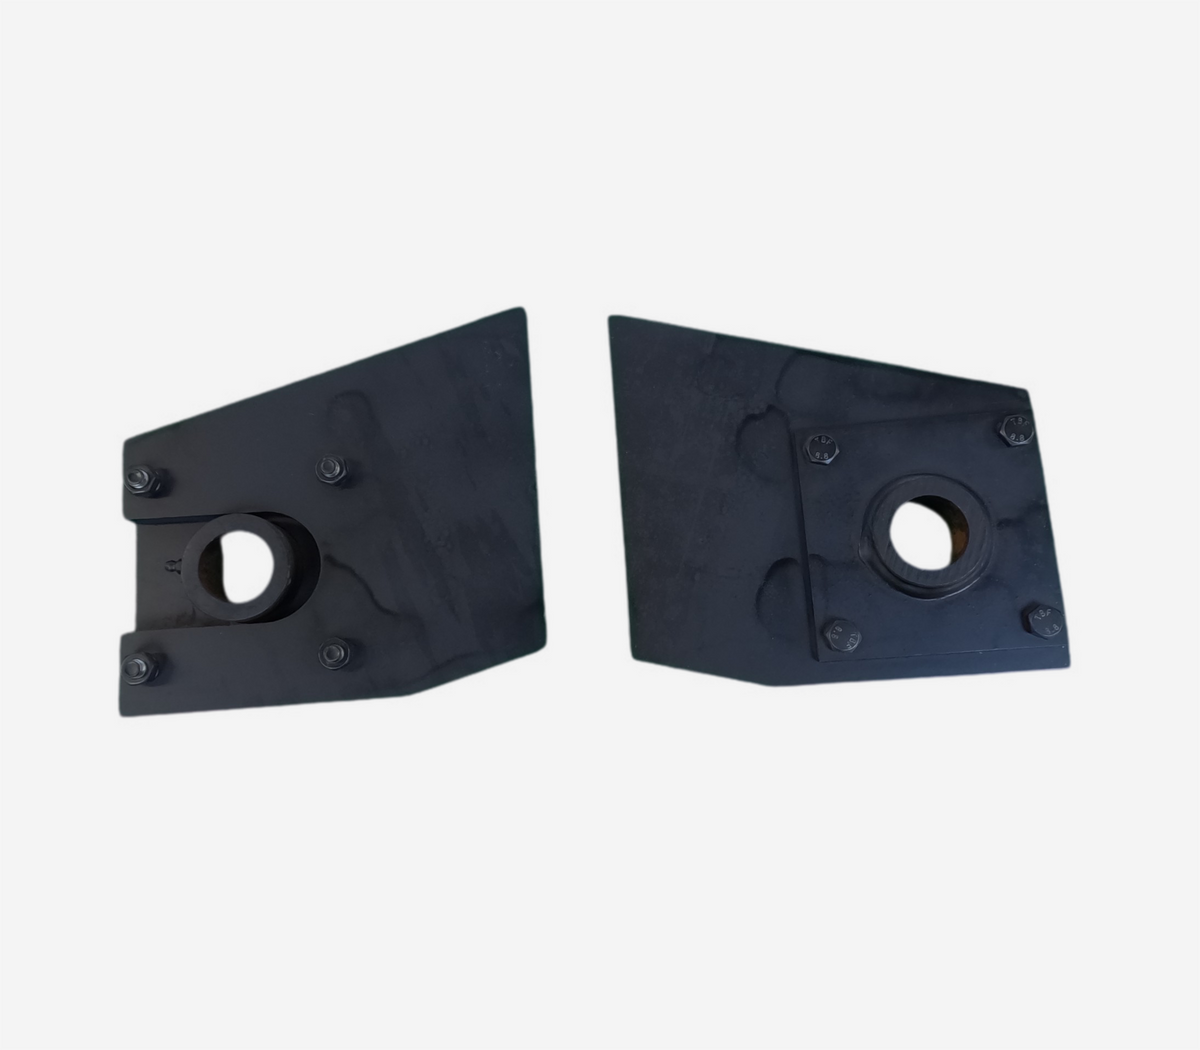 Heavy duty hinges for hydraulic dump bed systems.

